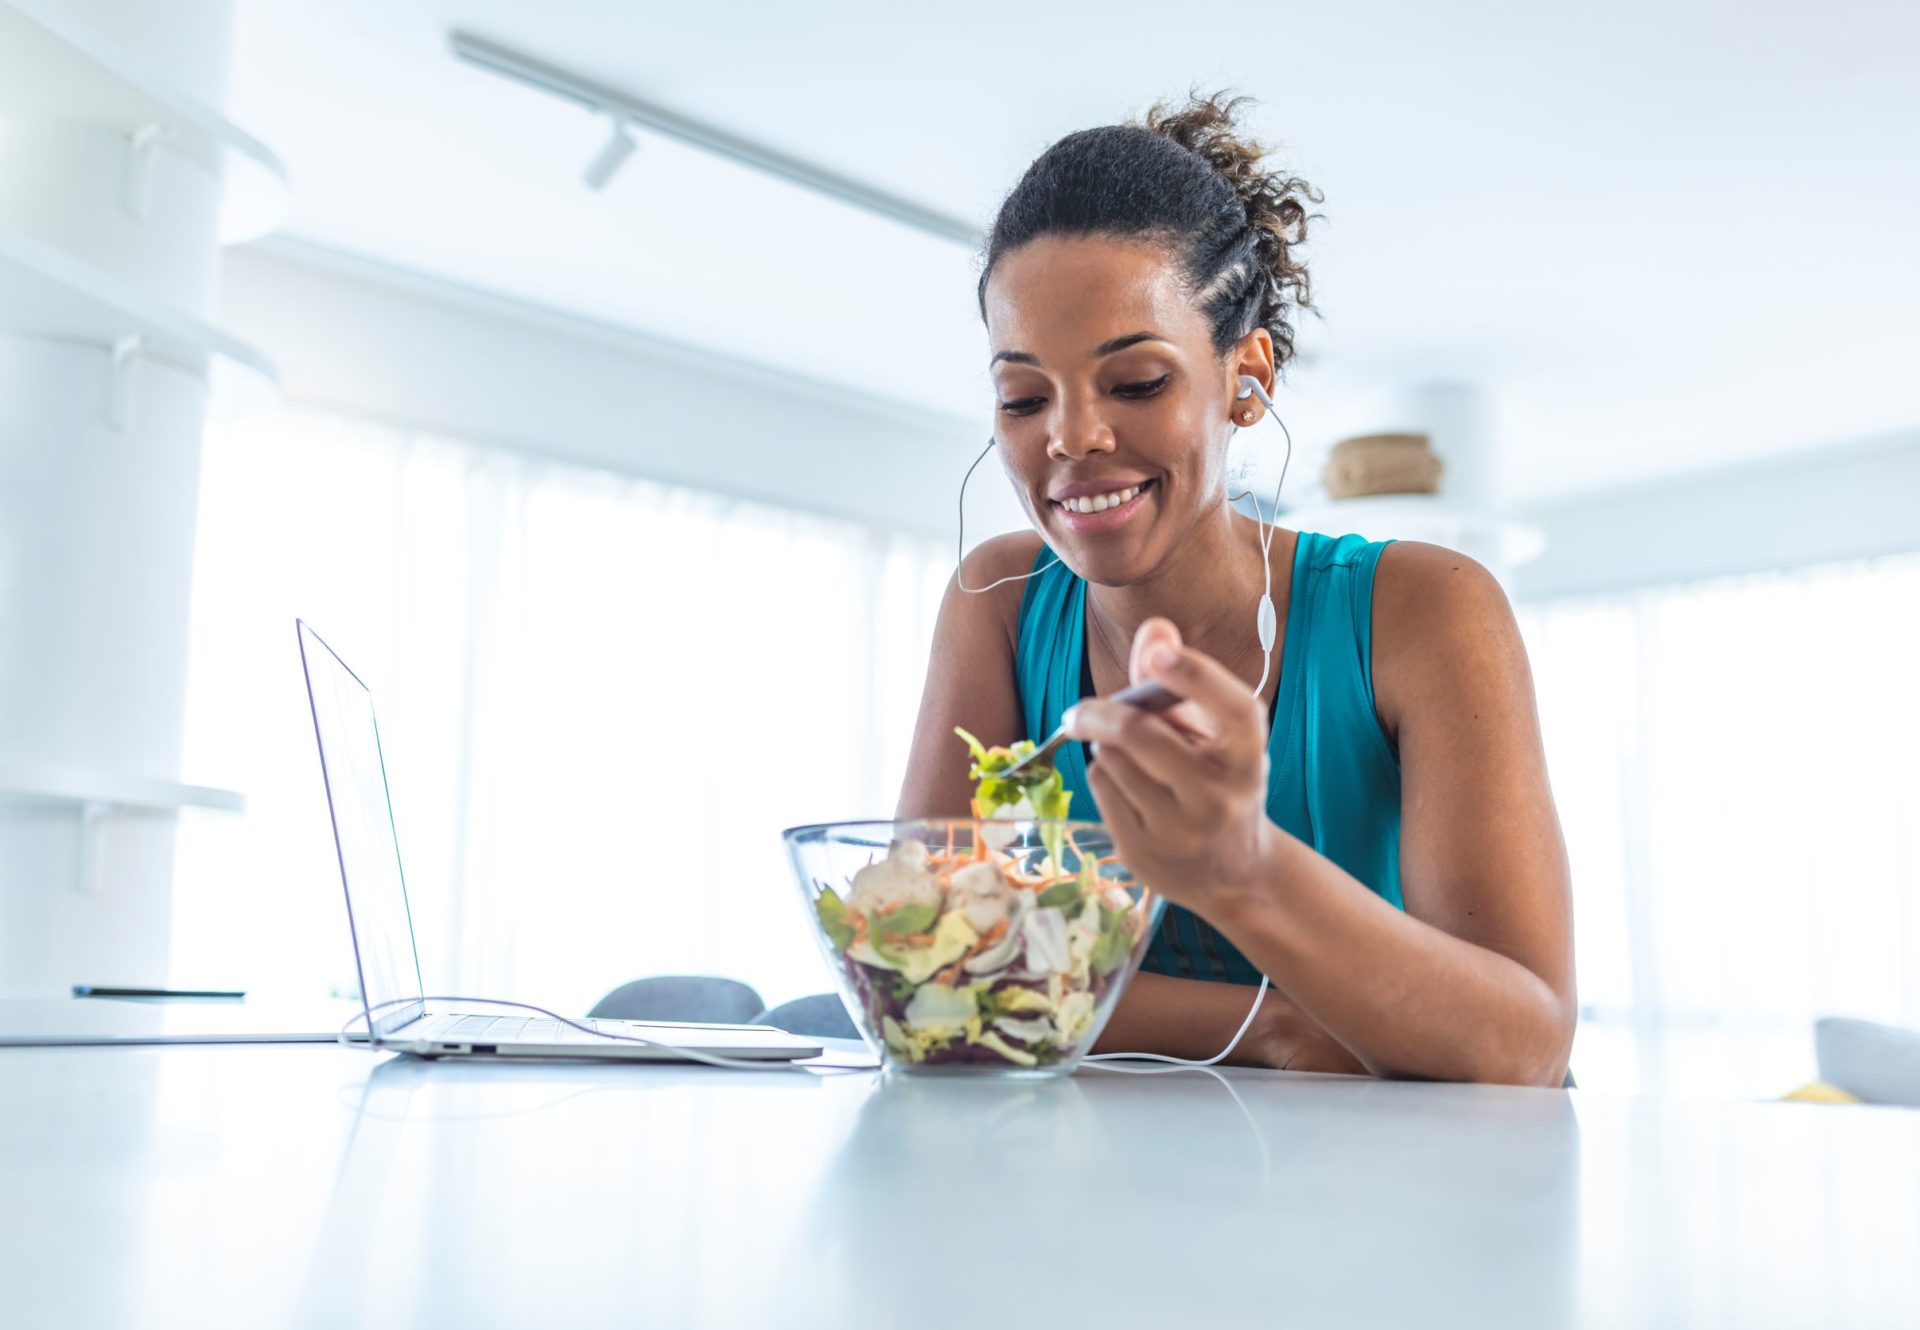 Woman eating a salad in white kitchen